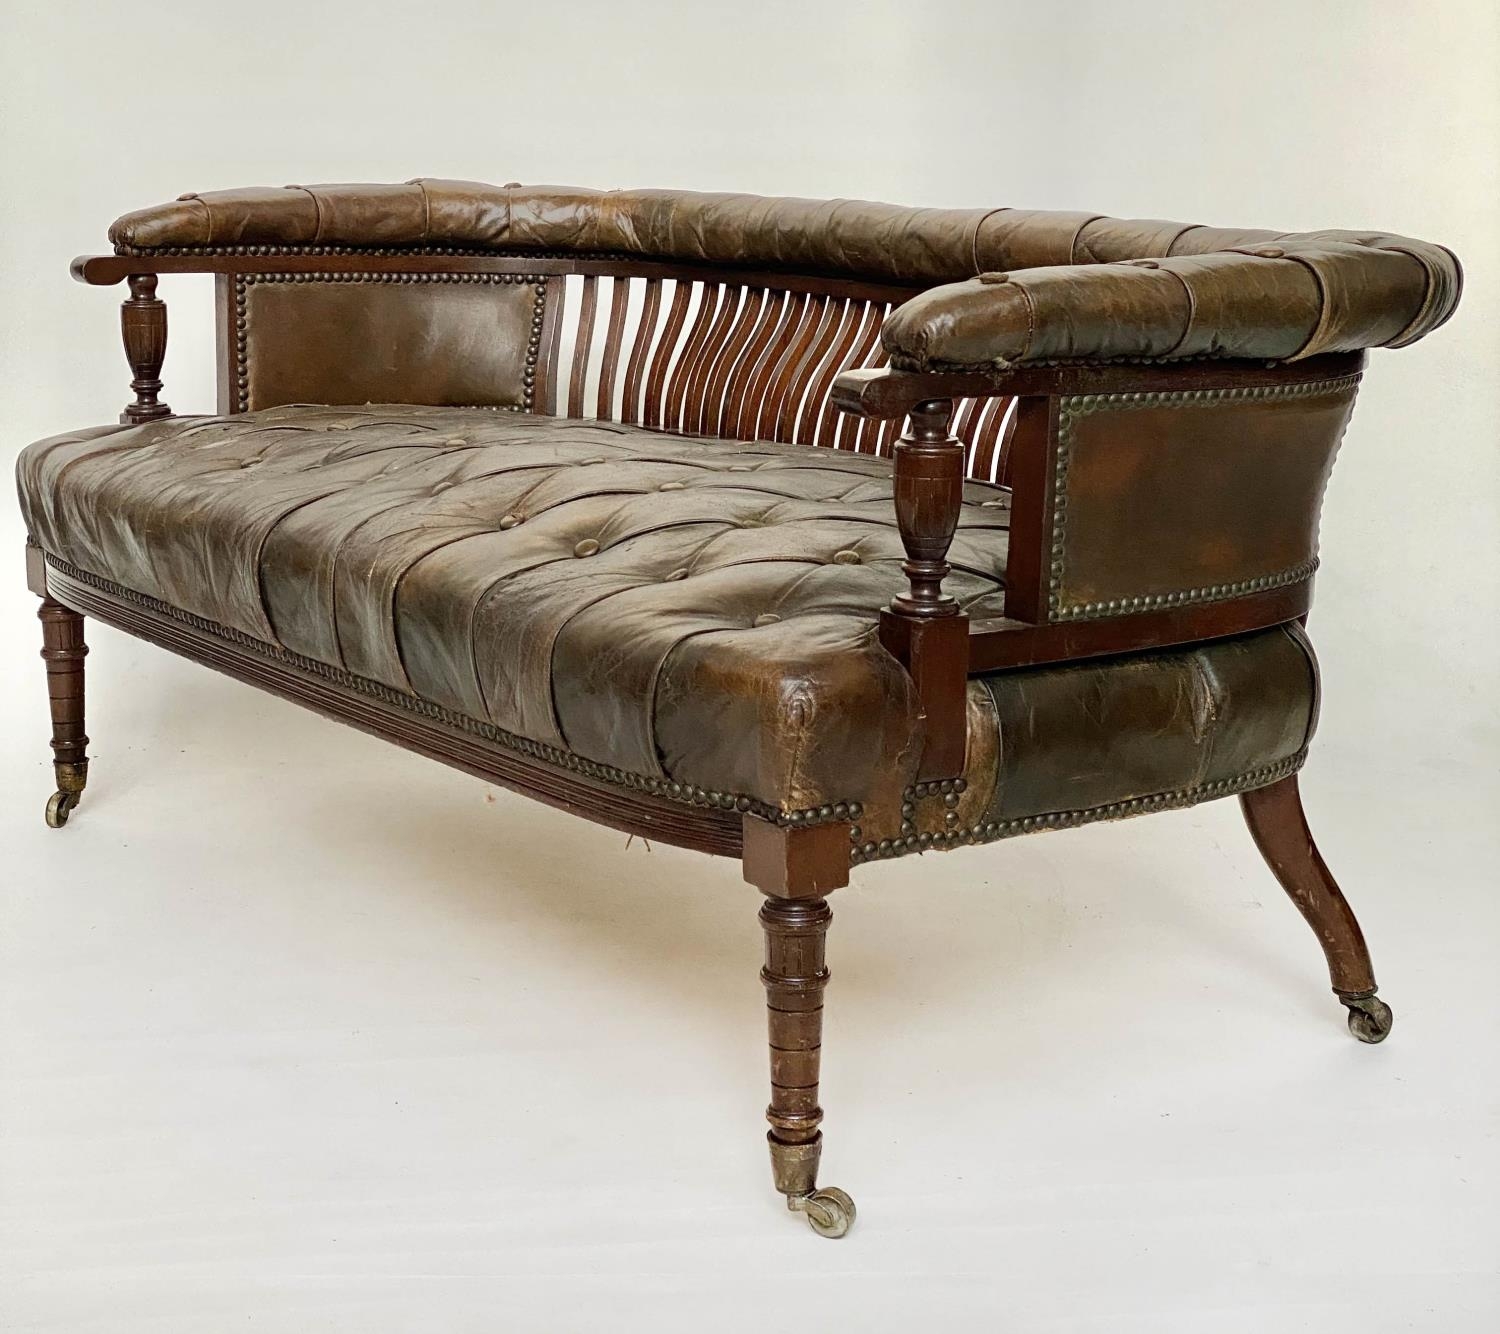 HALL BENCH, 19th century country house walnut with buttoned tan leather upholstered seat and arms, - Image 5 of 7